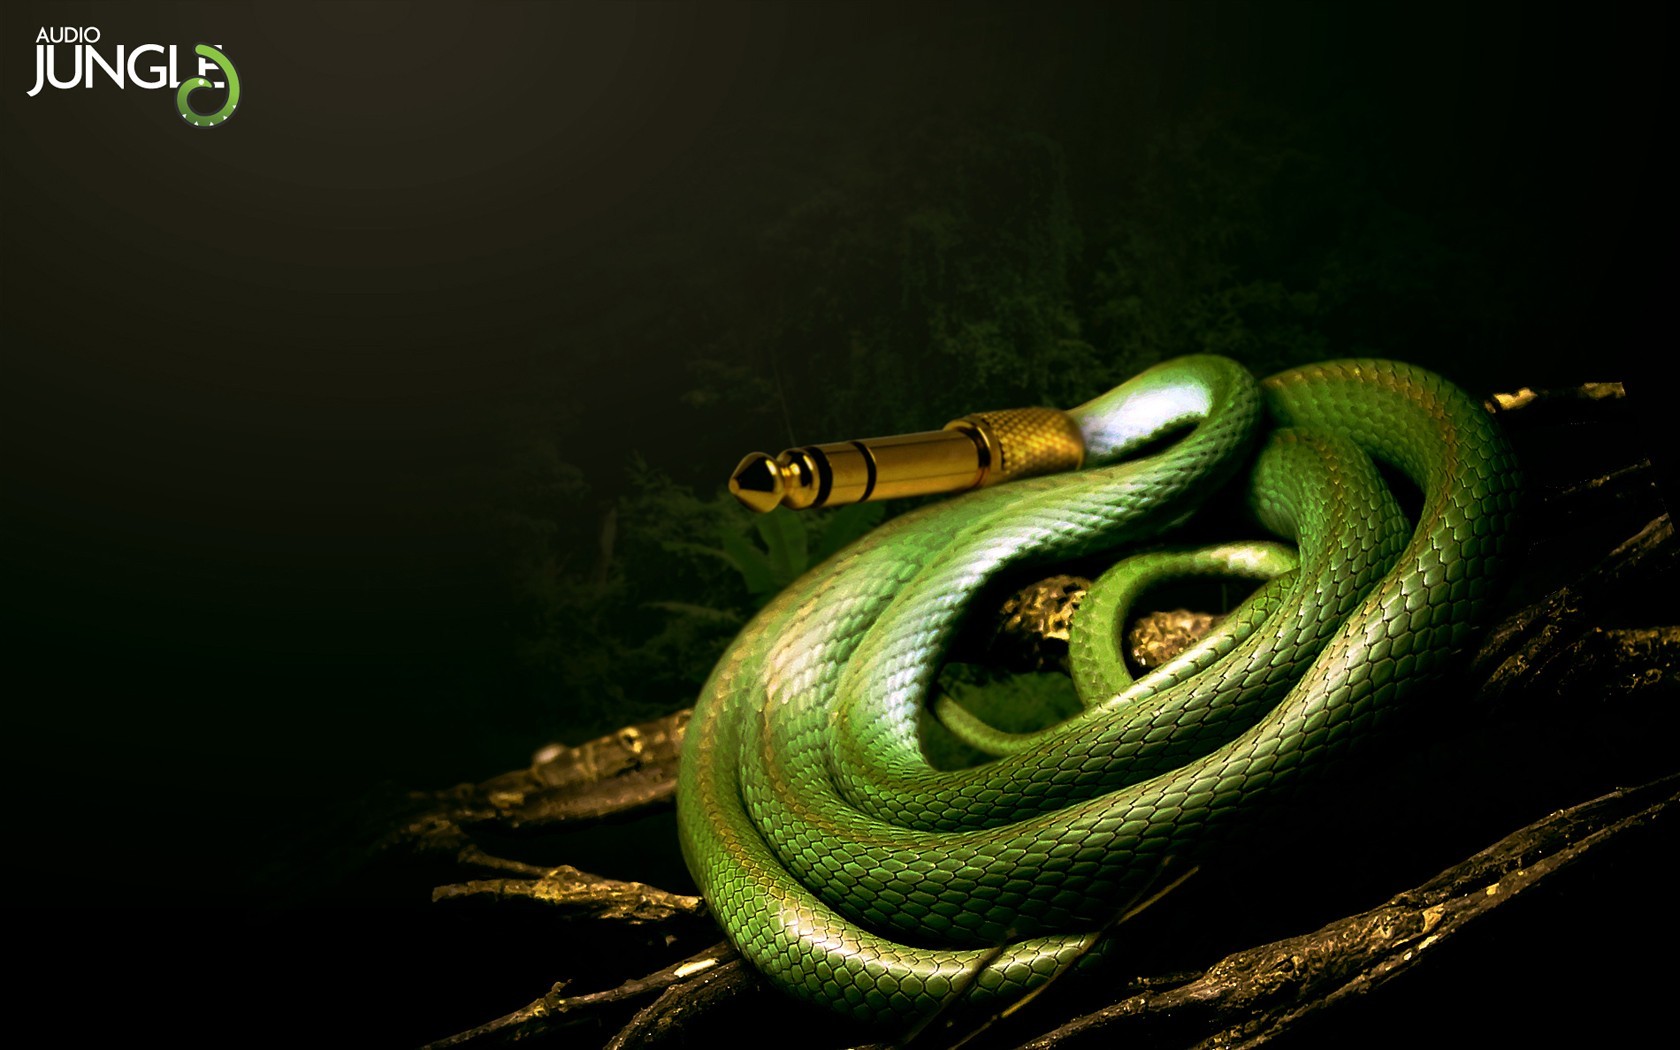 General 1680x1050 music power cord green snake animals reptiles green snake audio jungle advertisements contests photoshopped photo manipulation